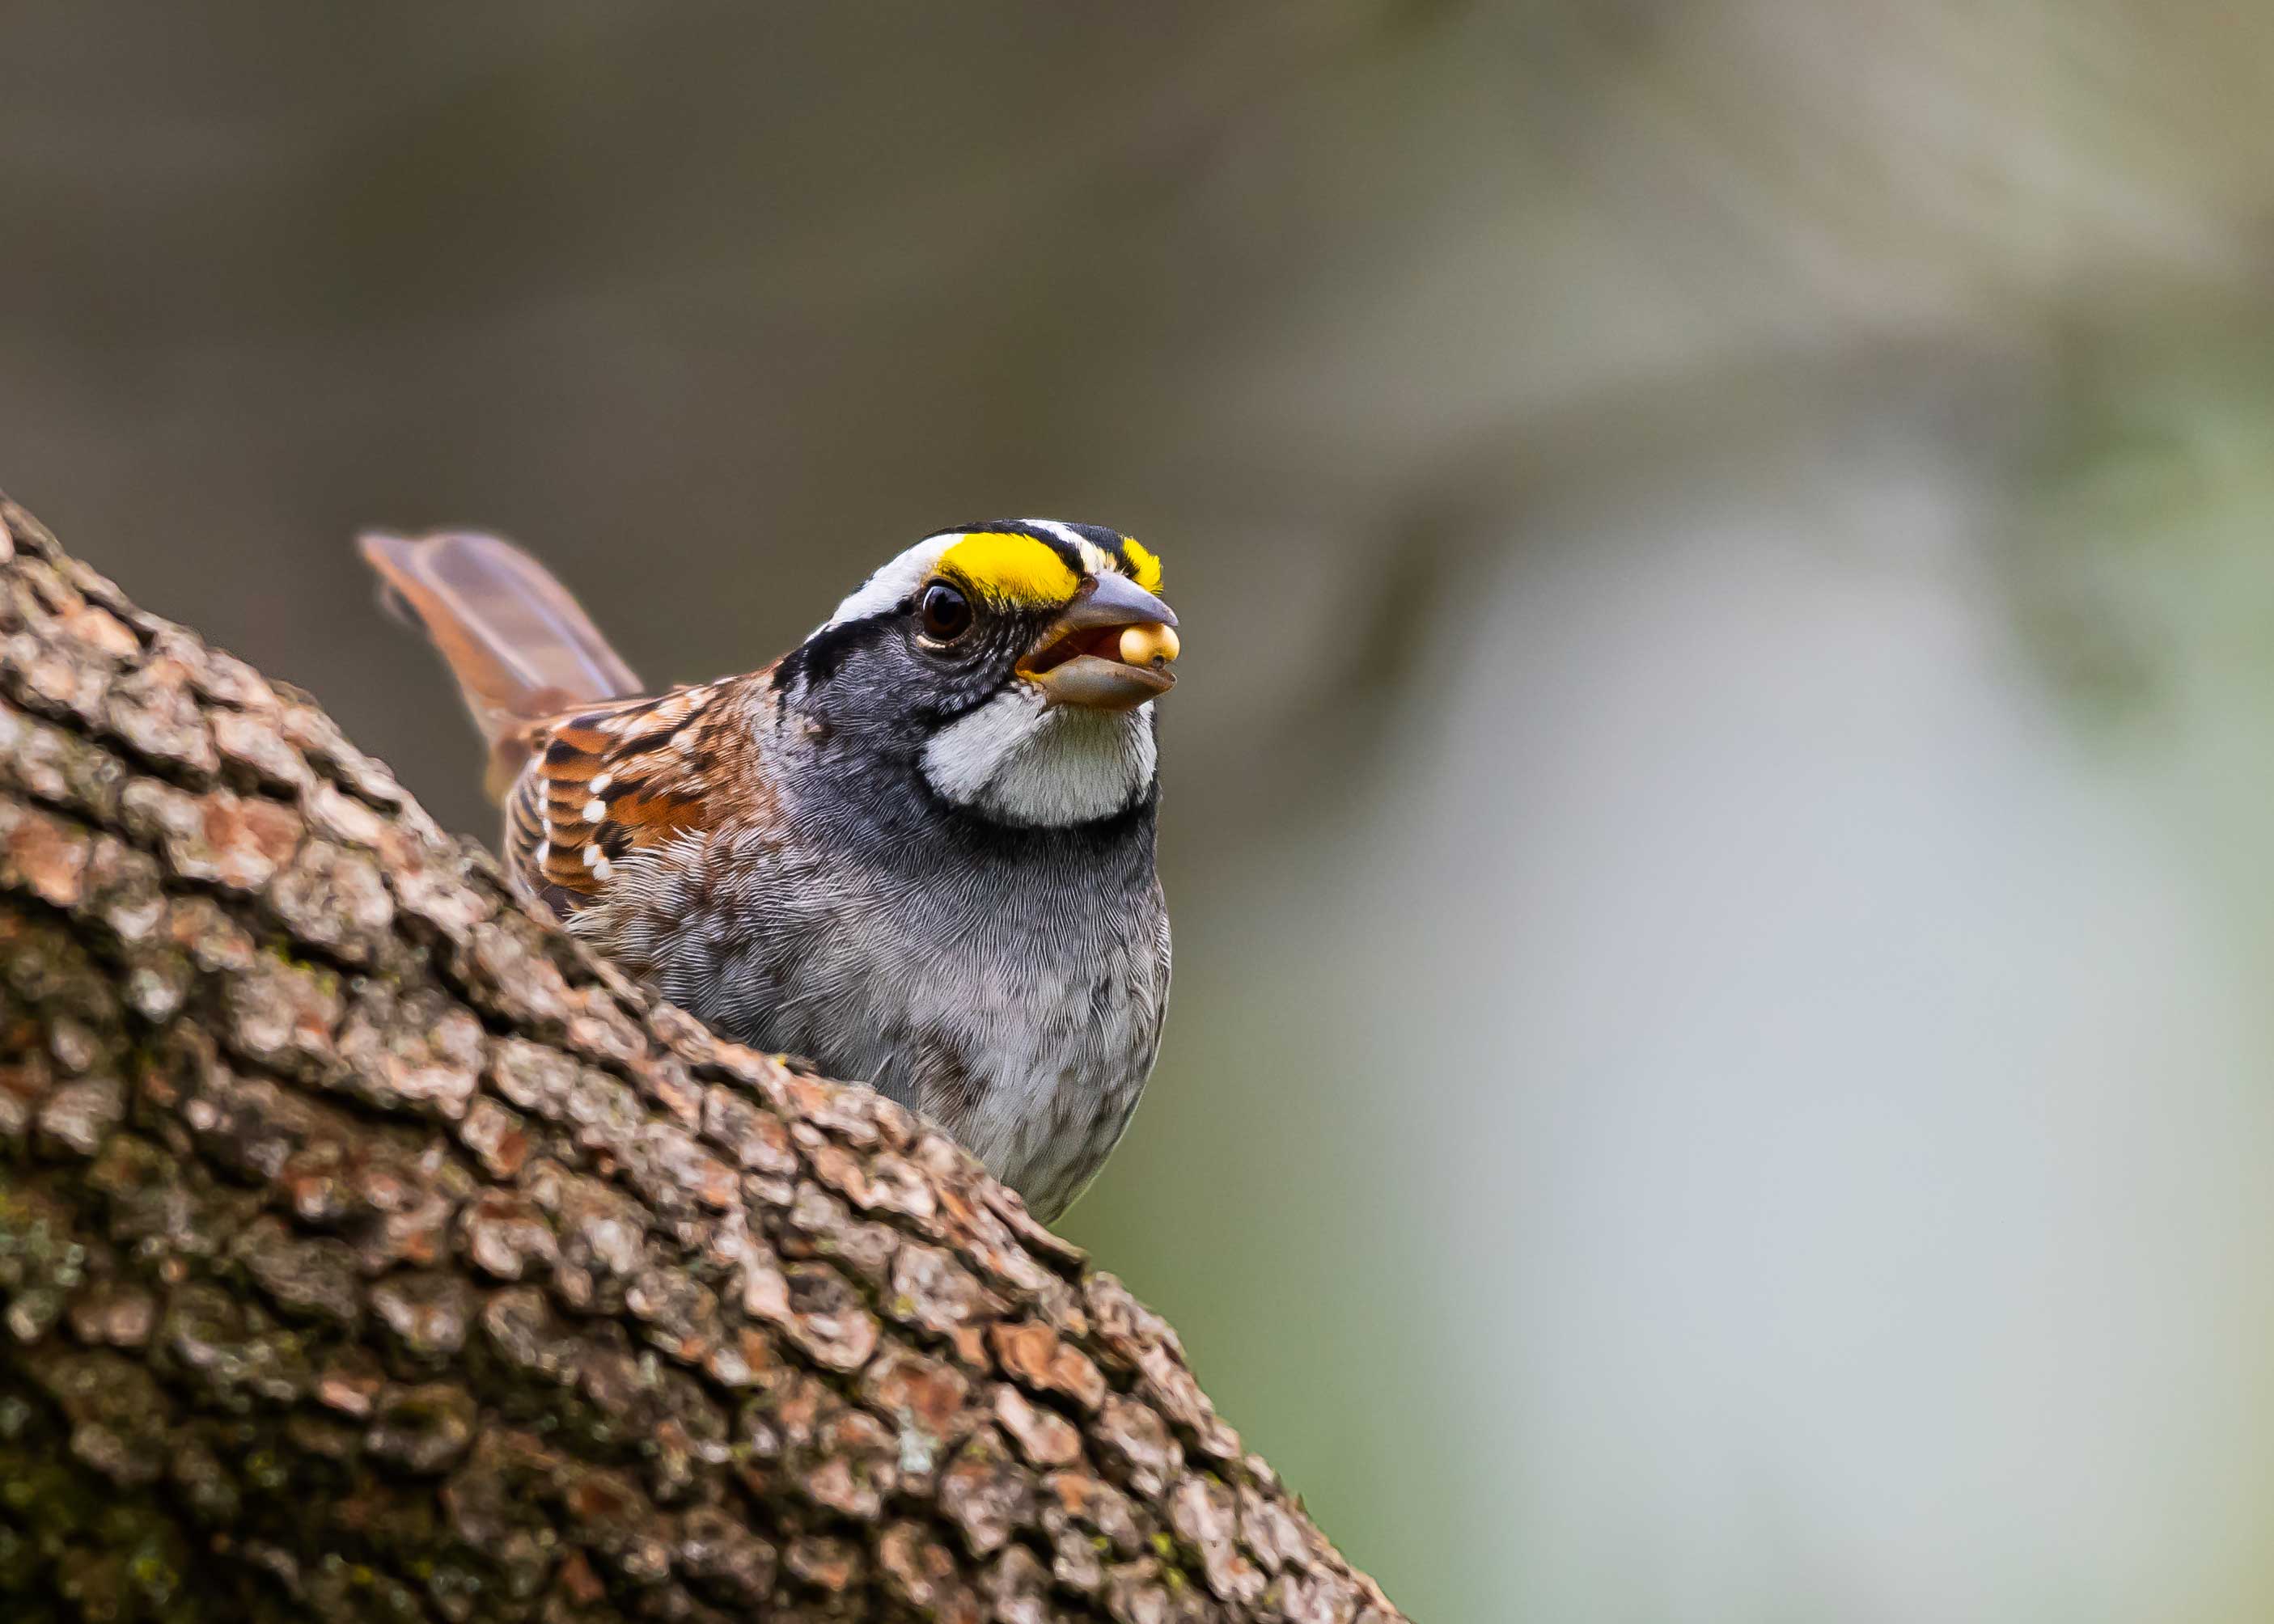 A white-throated sparrow on a branch.